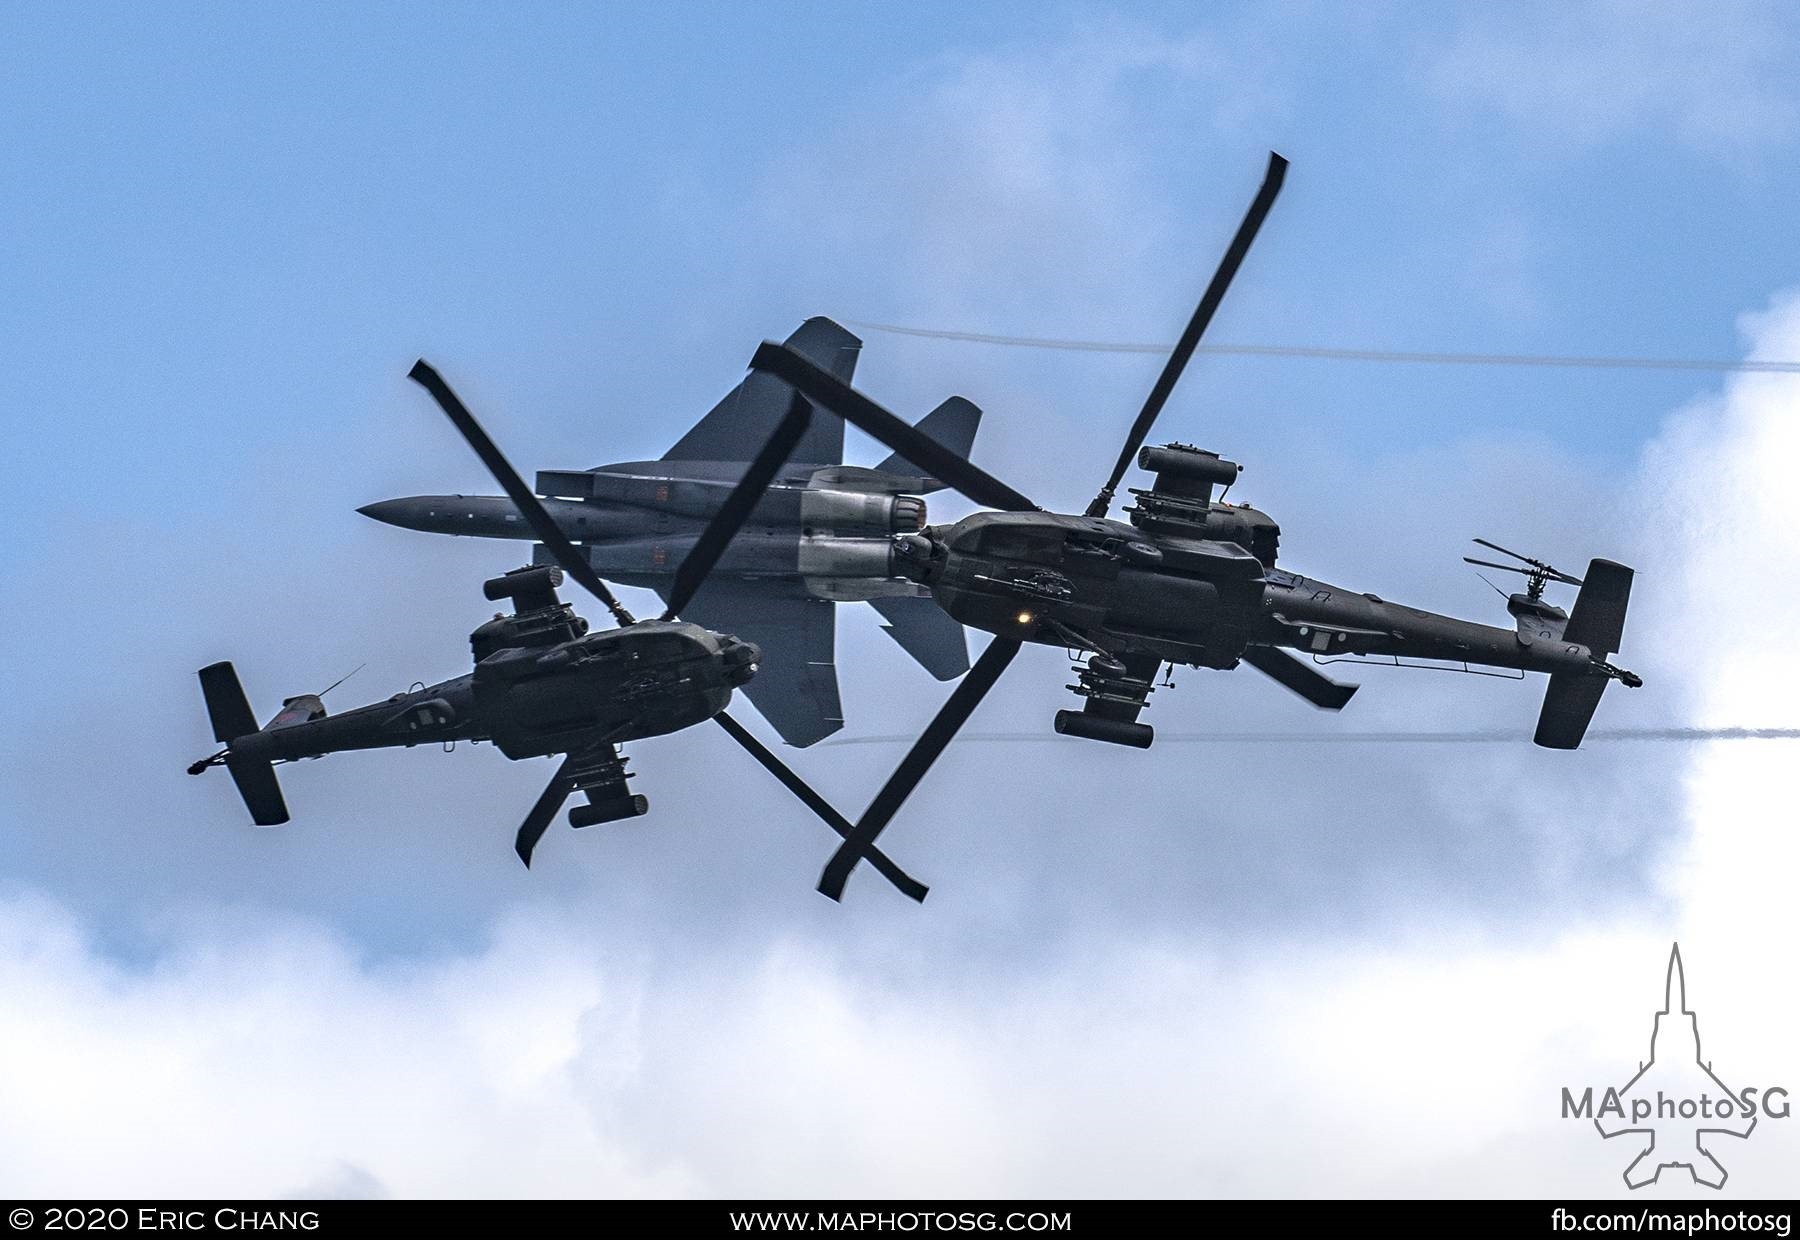 Opening sequence of the RSAF Aerial Display with the 2 AH-64Ds and F-15SG performing the Cross Dagger